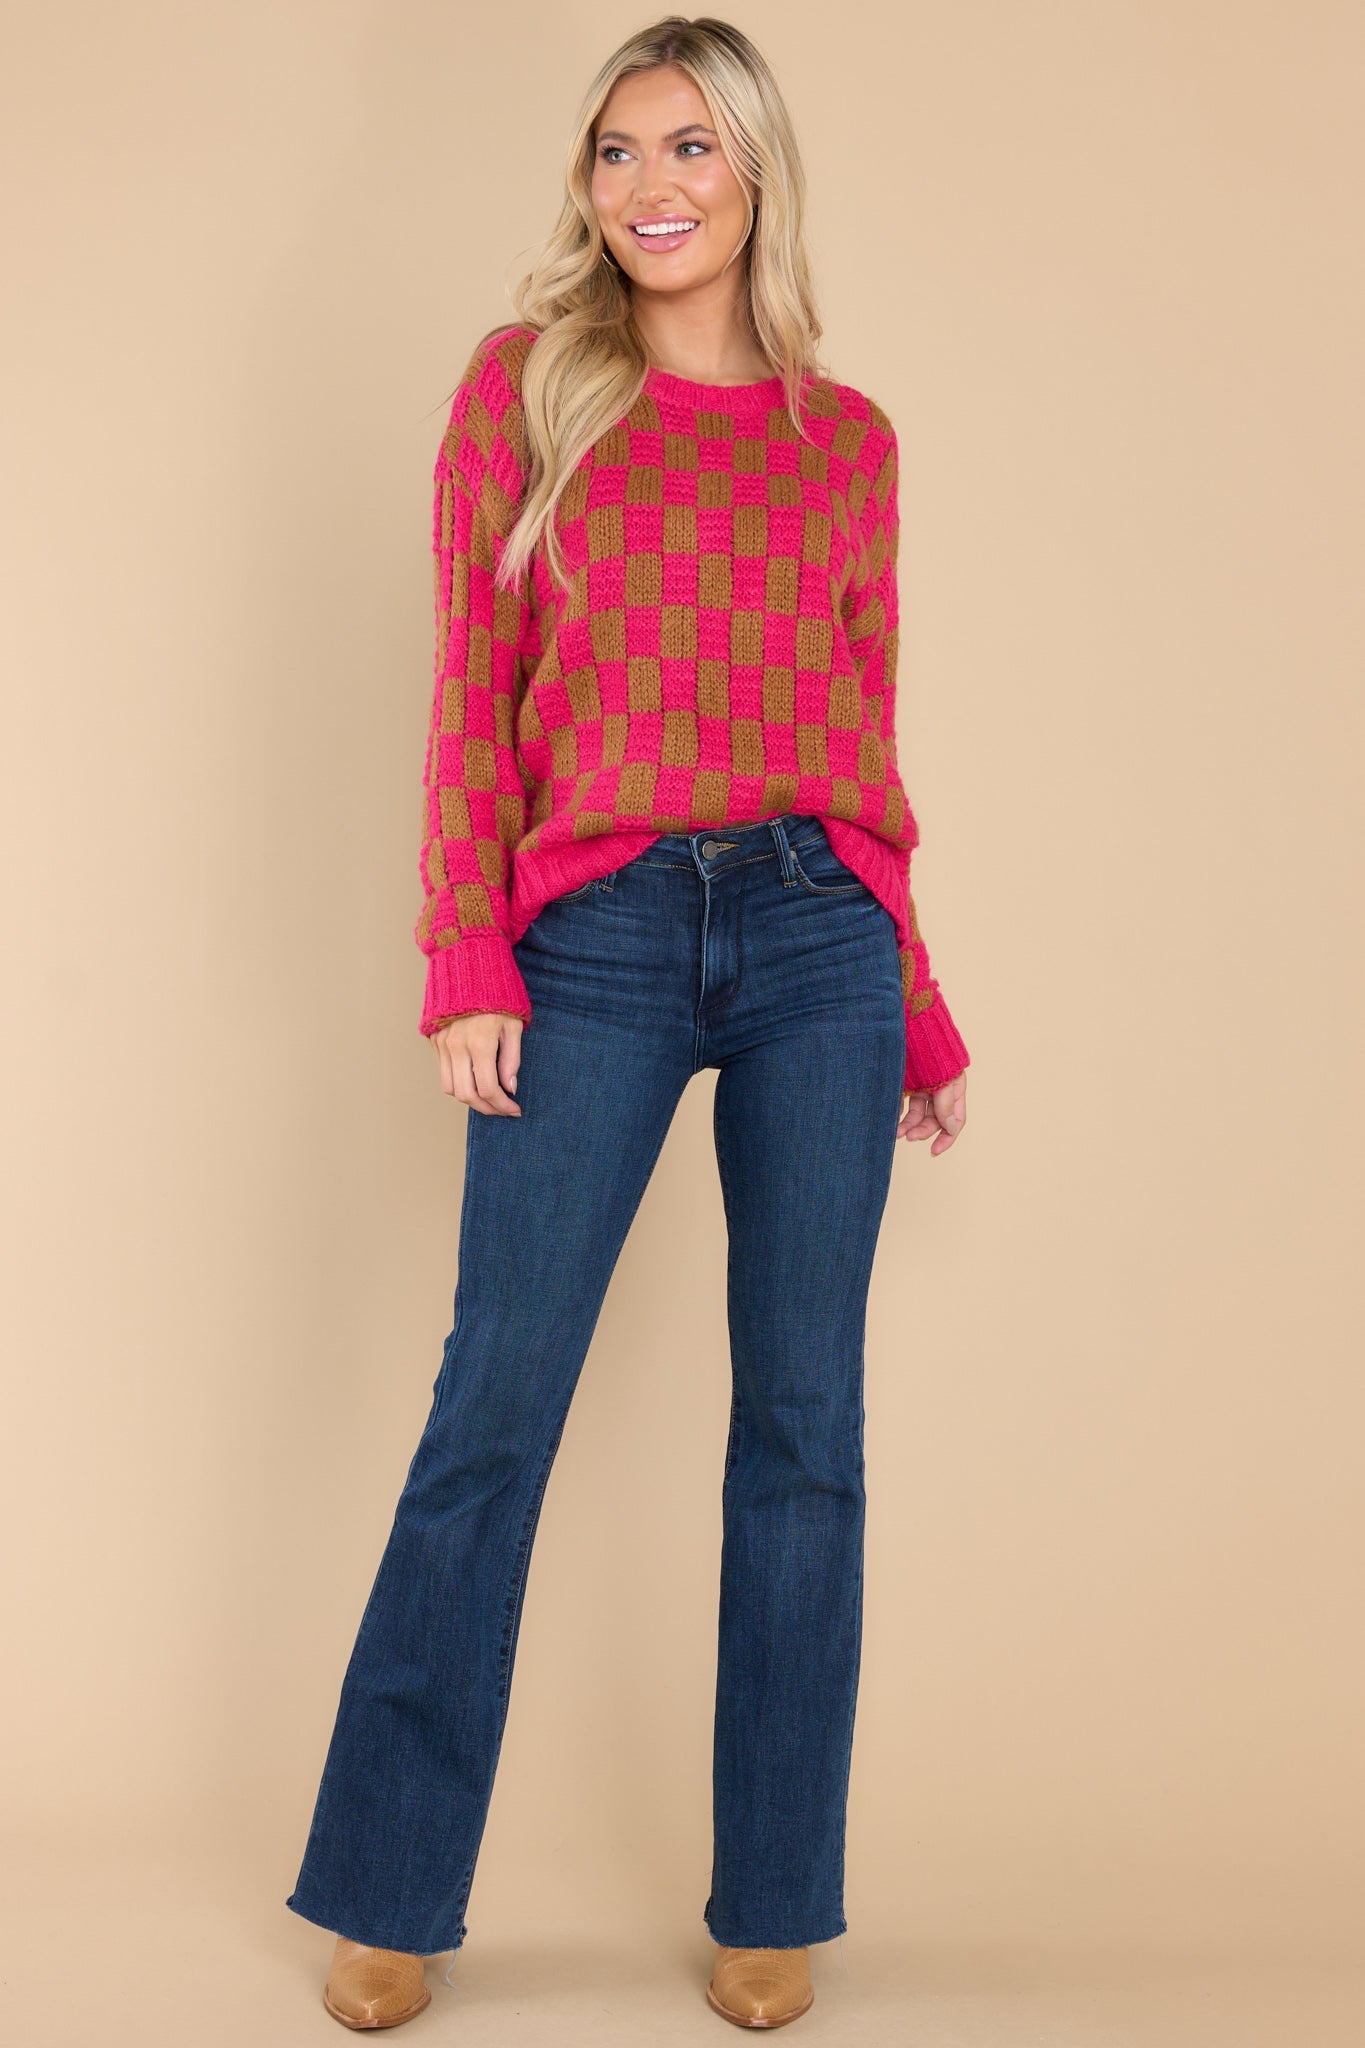 One Move Ahead Fuchsia Pink Checkered Sweater - Red Dress